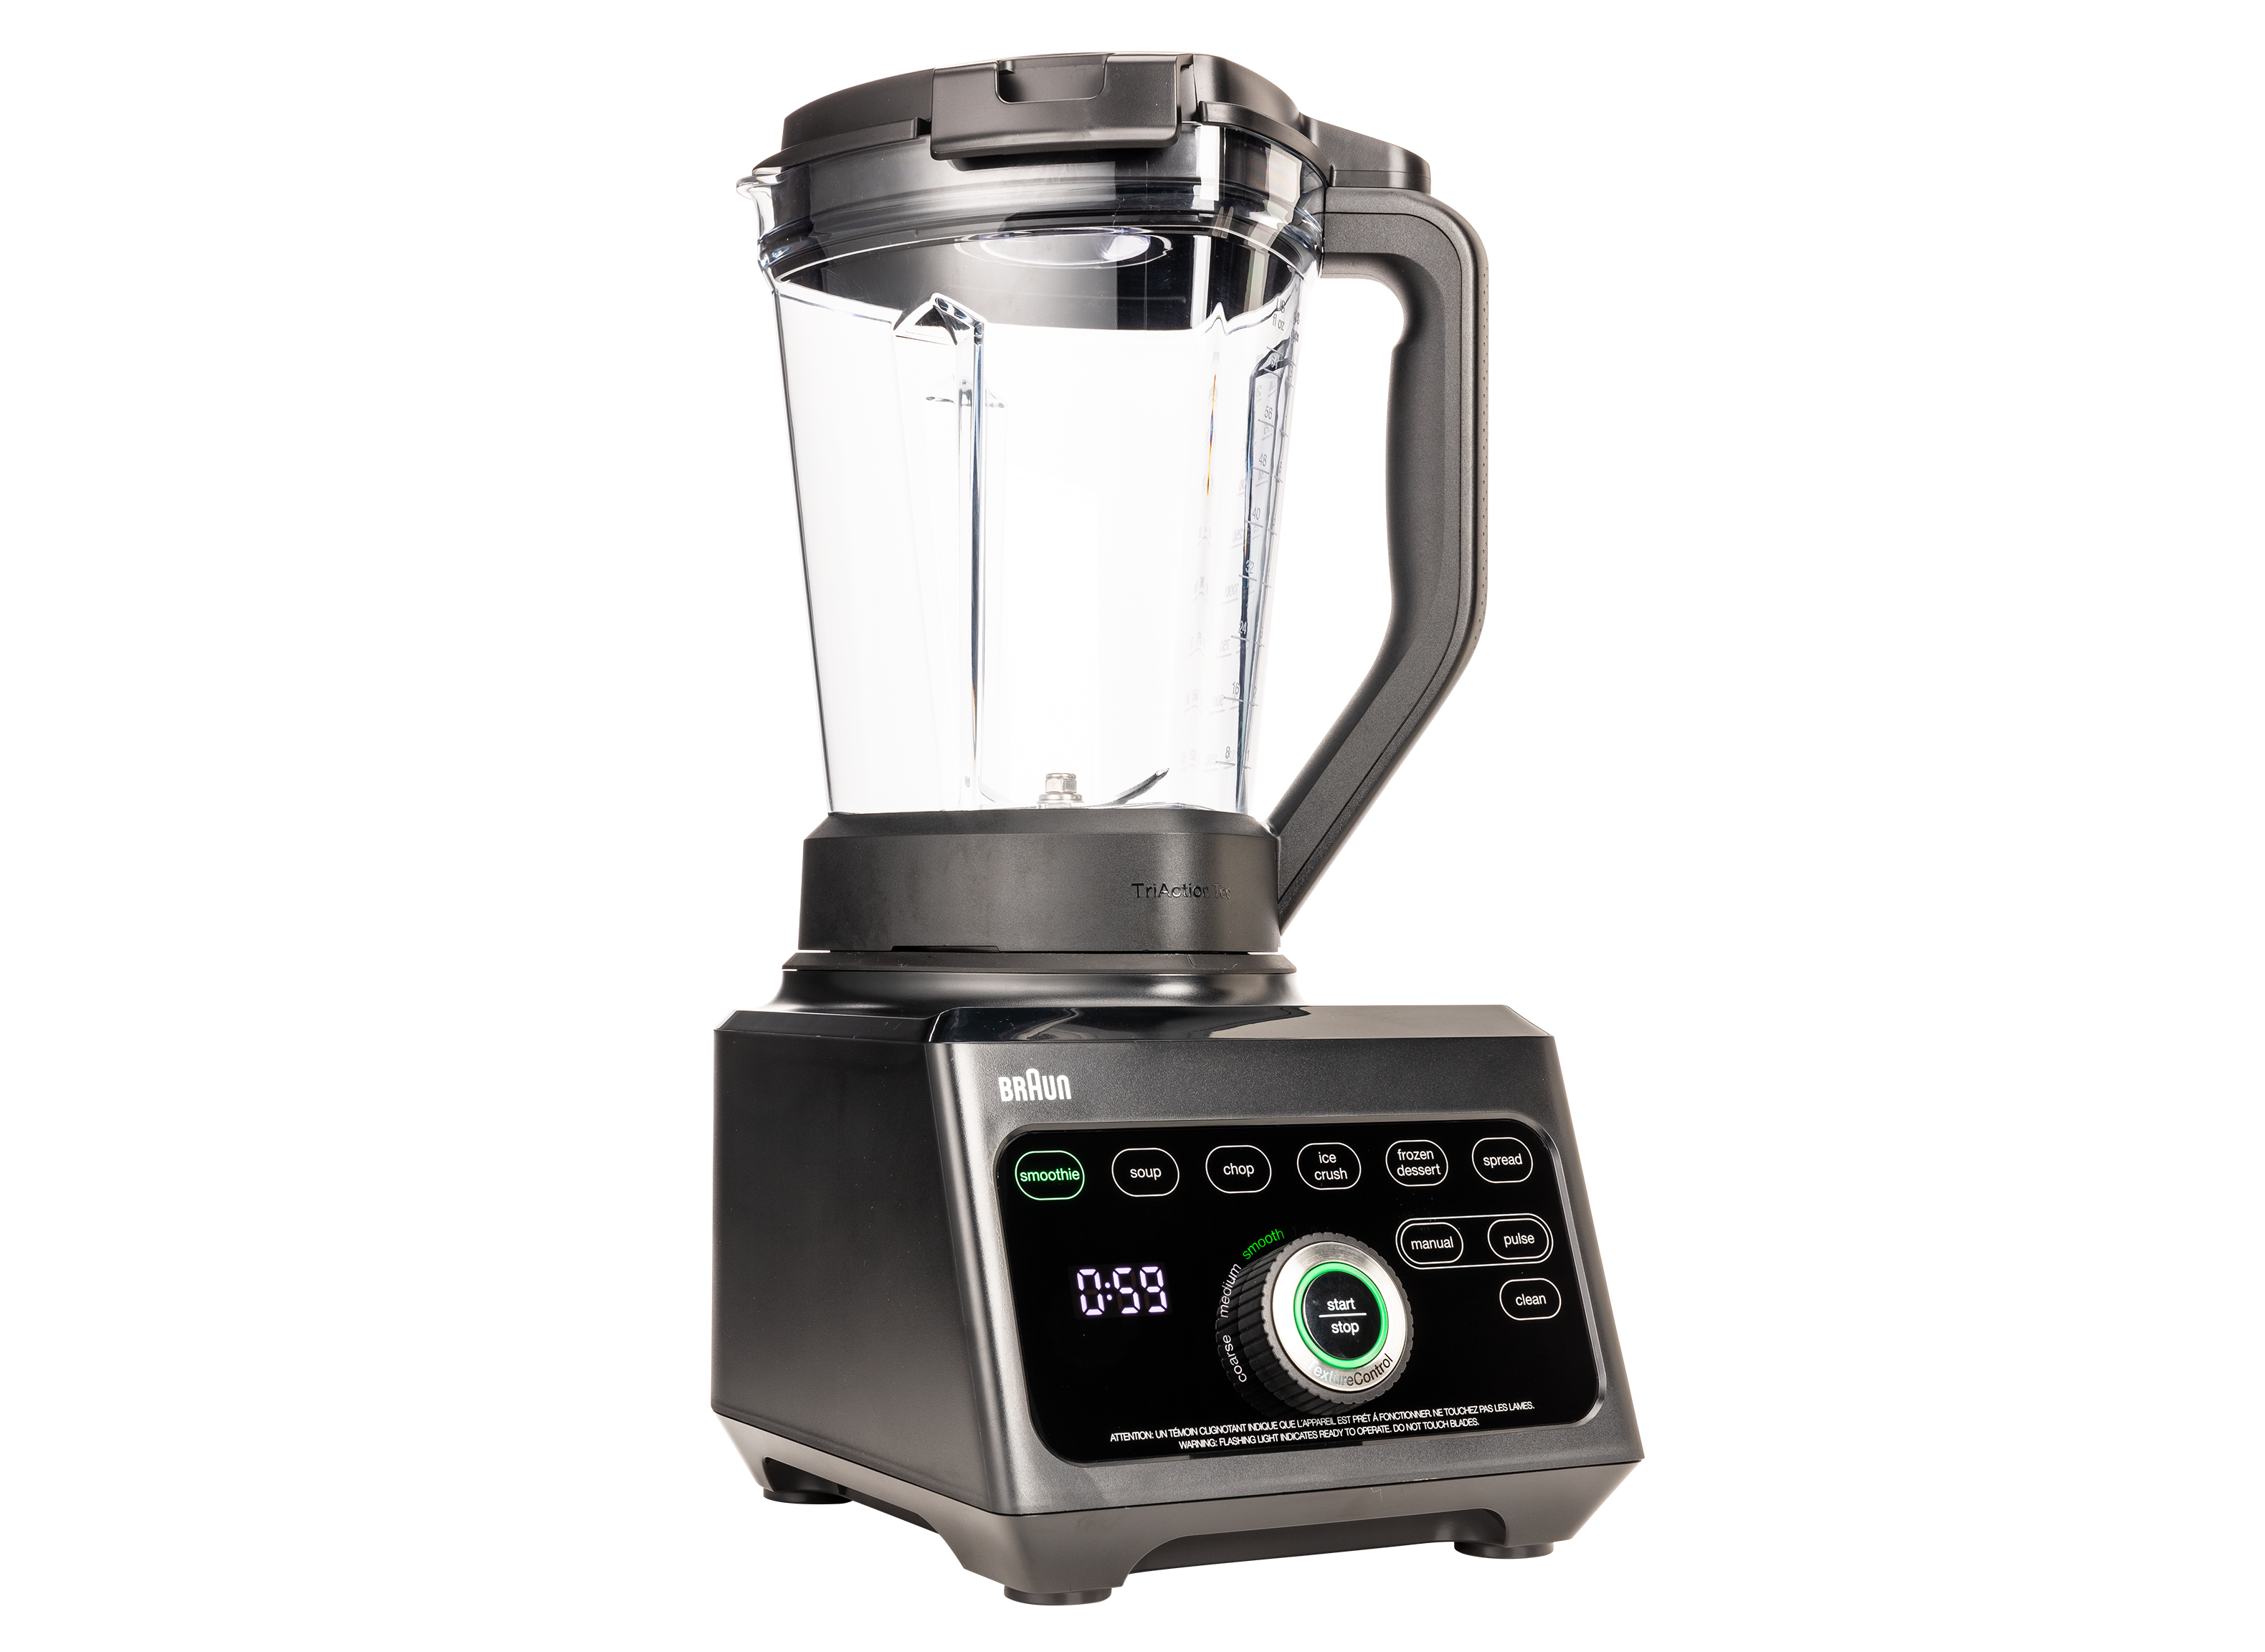 Braun TriForce Power Blender with Smoothie2Go Set + Reviews